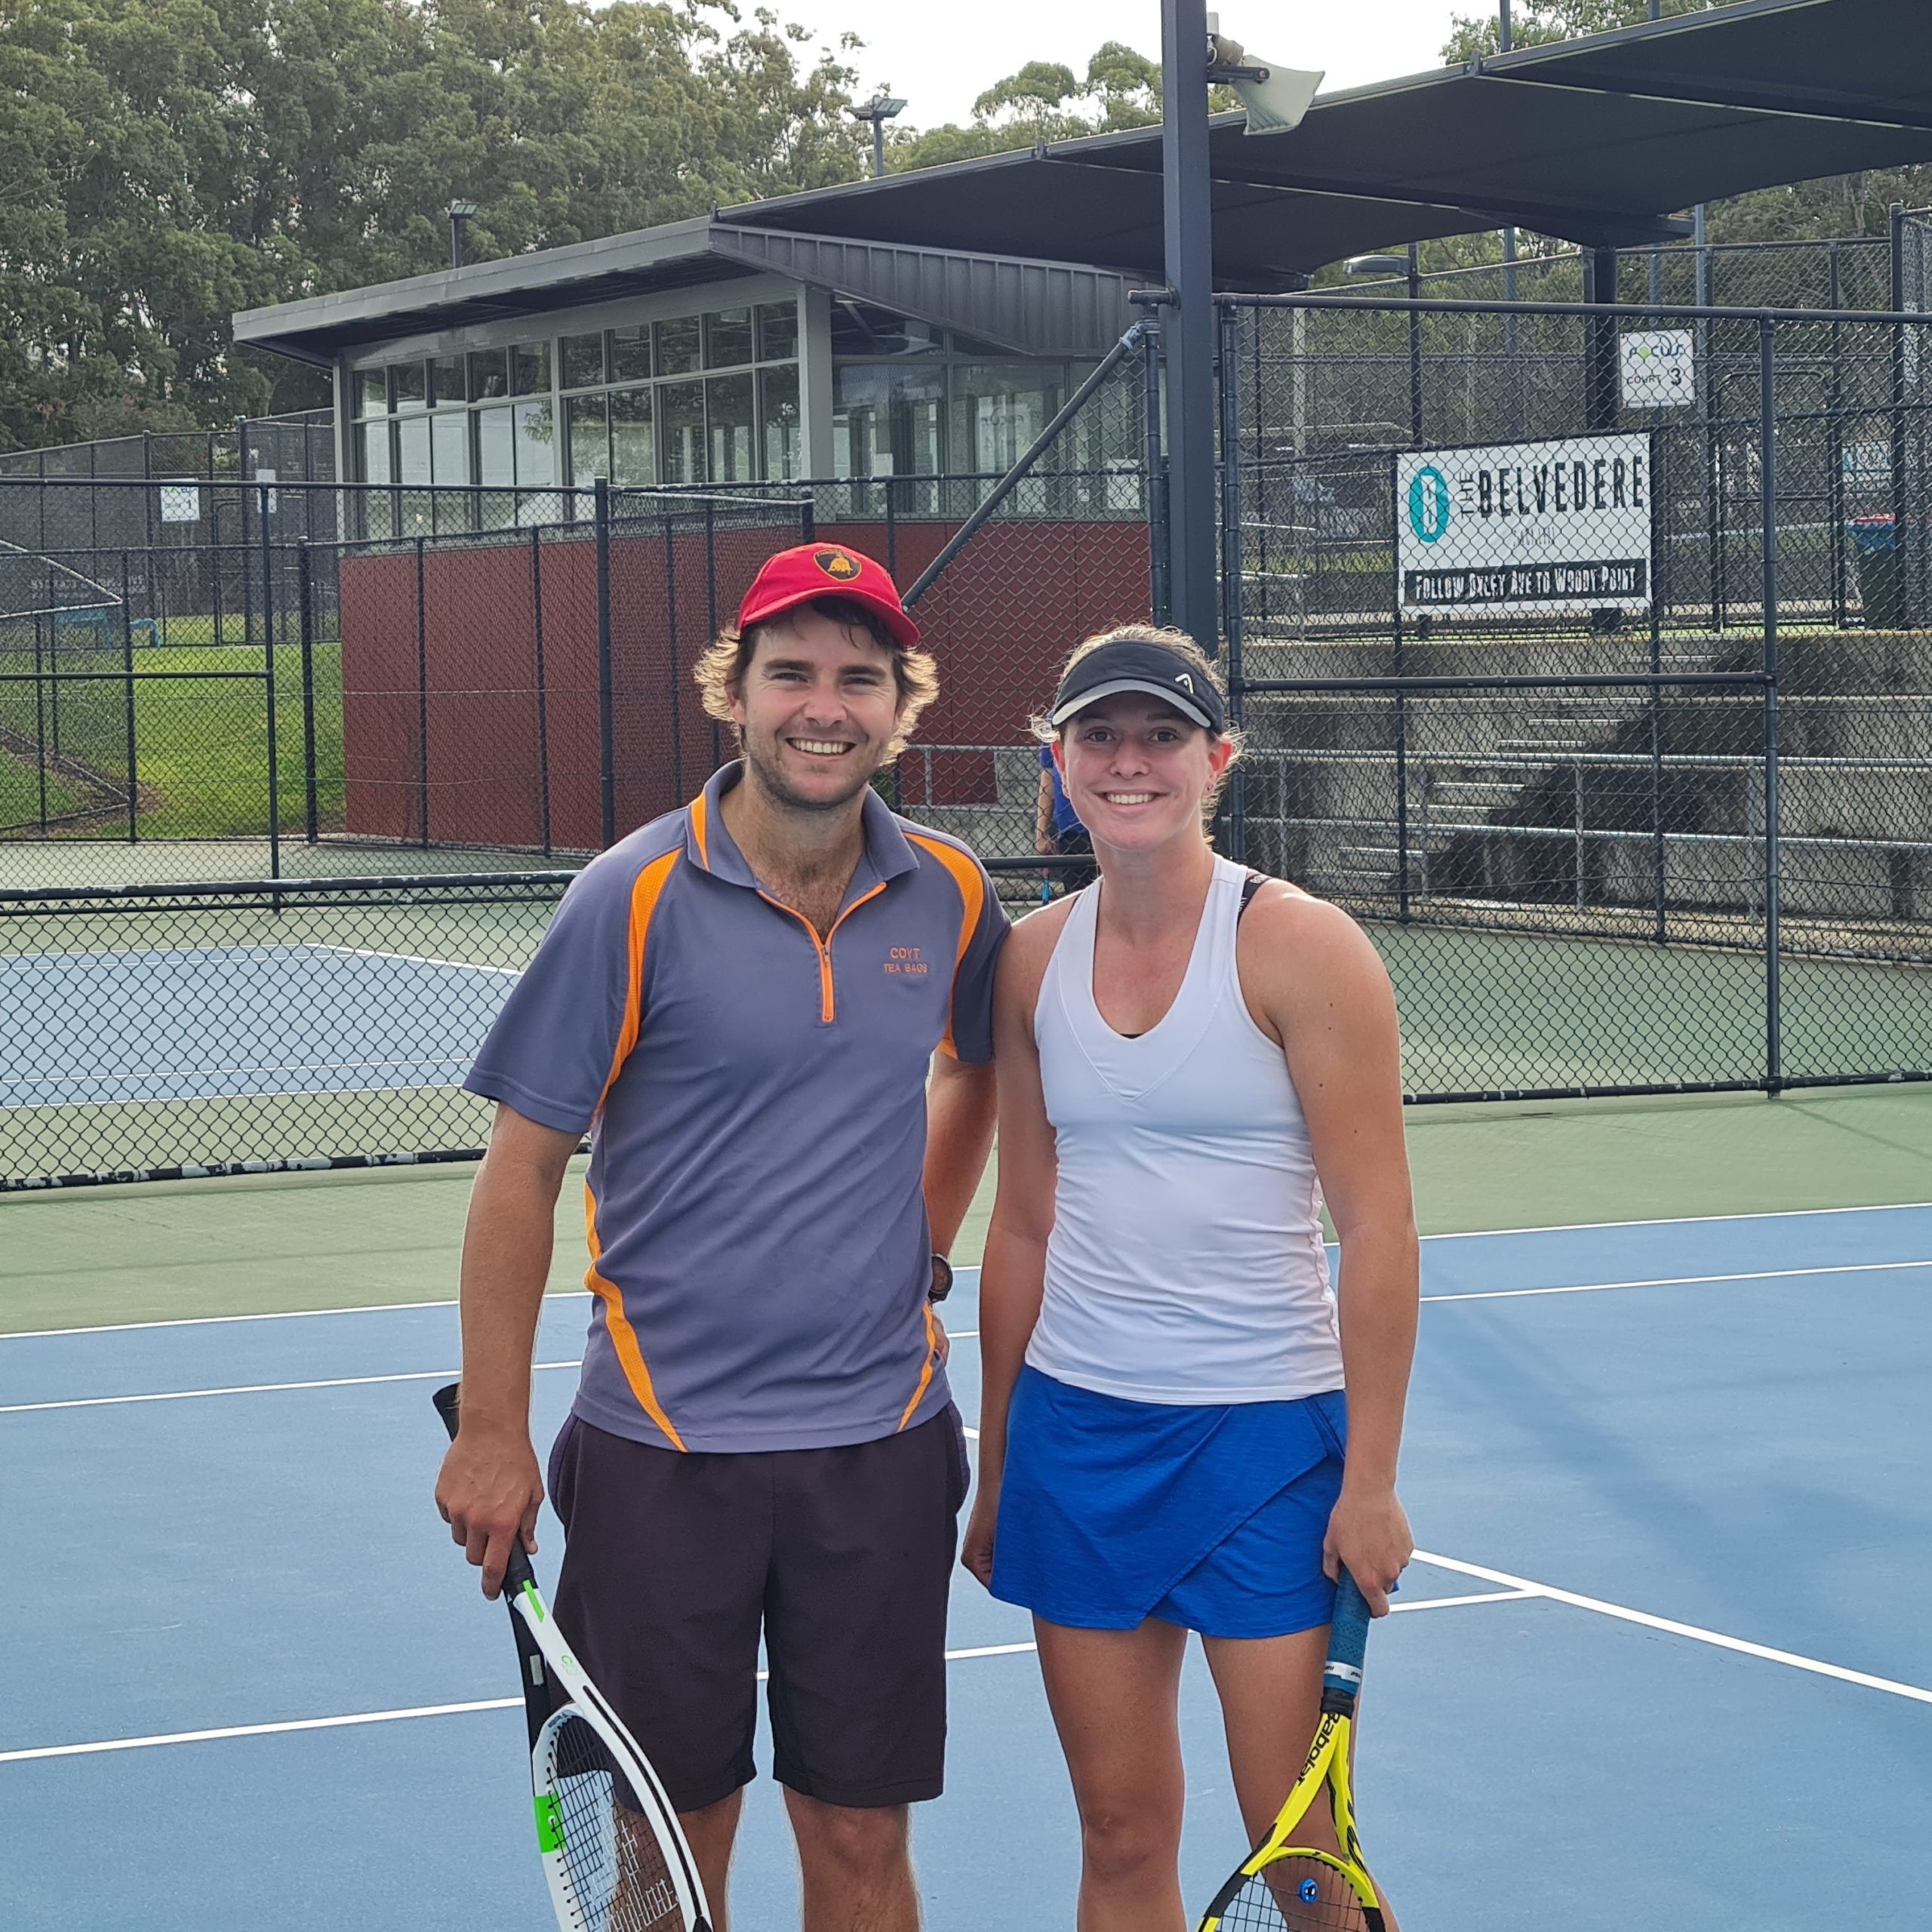 Focus Tennis Academy adult tennis player stnading on tennis court with coach